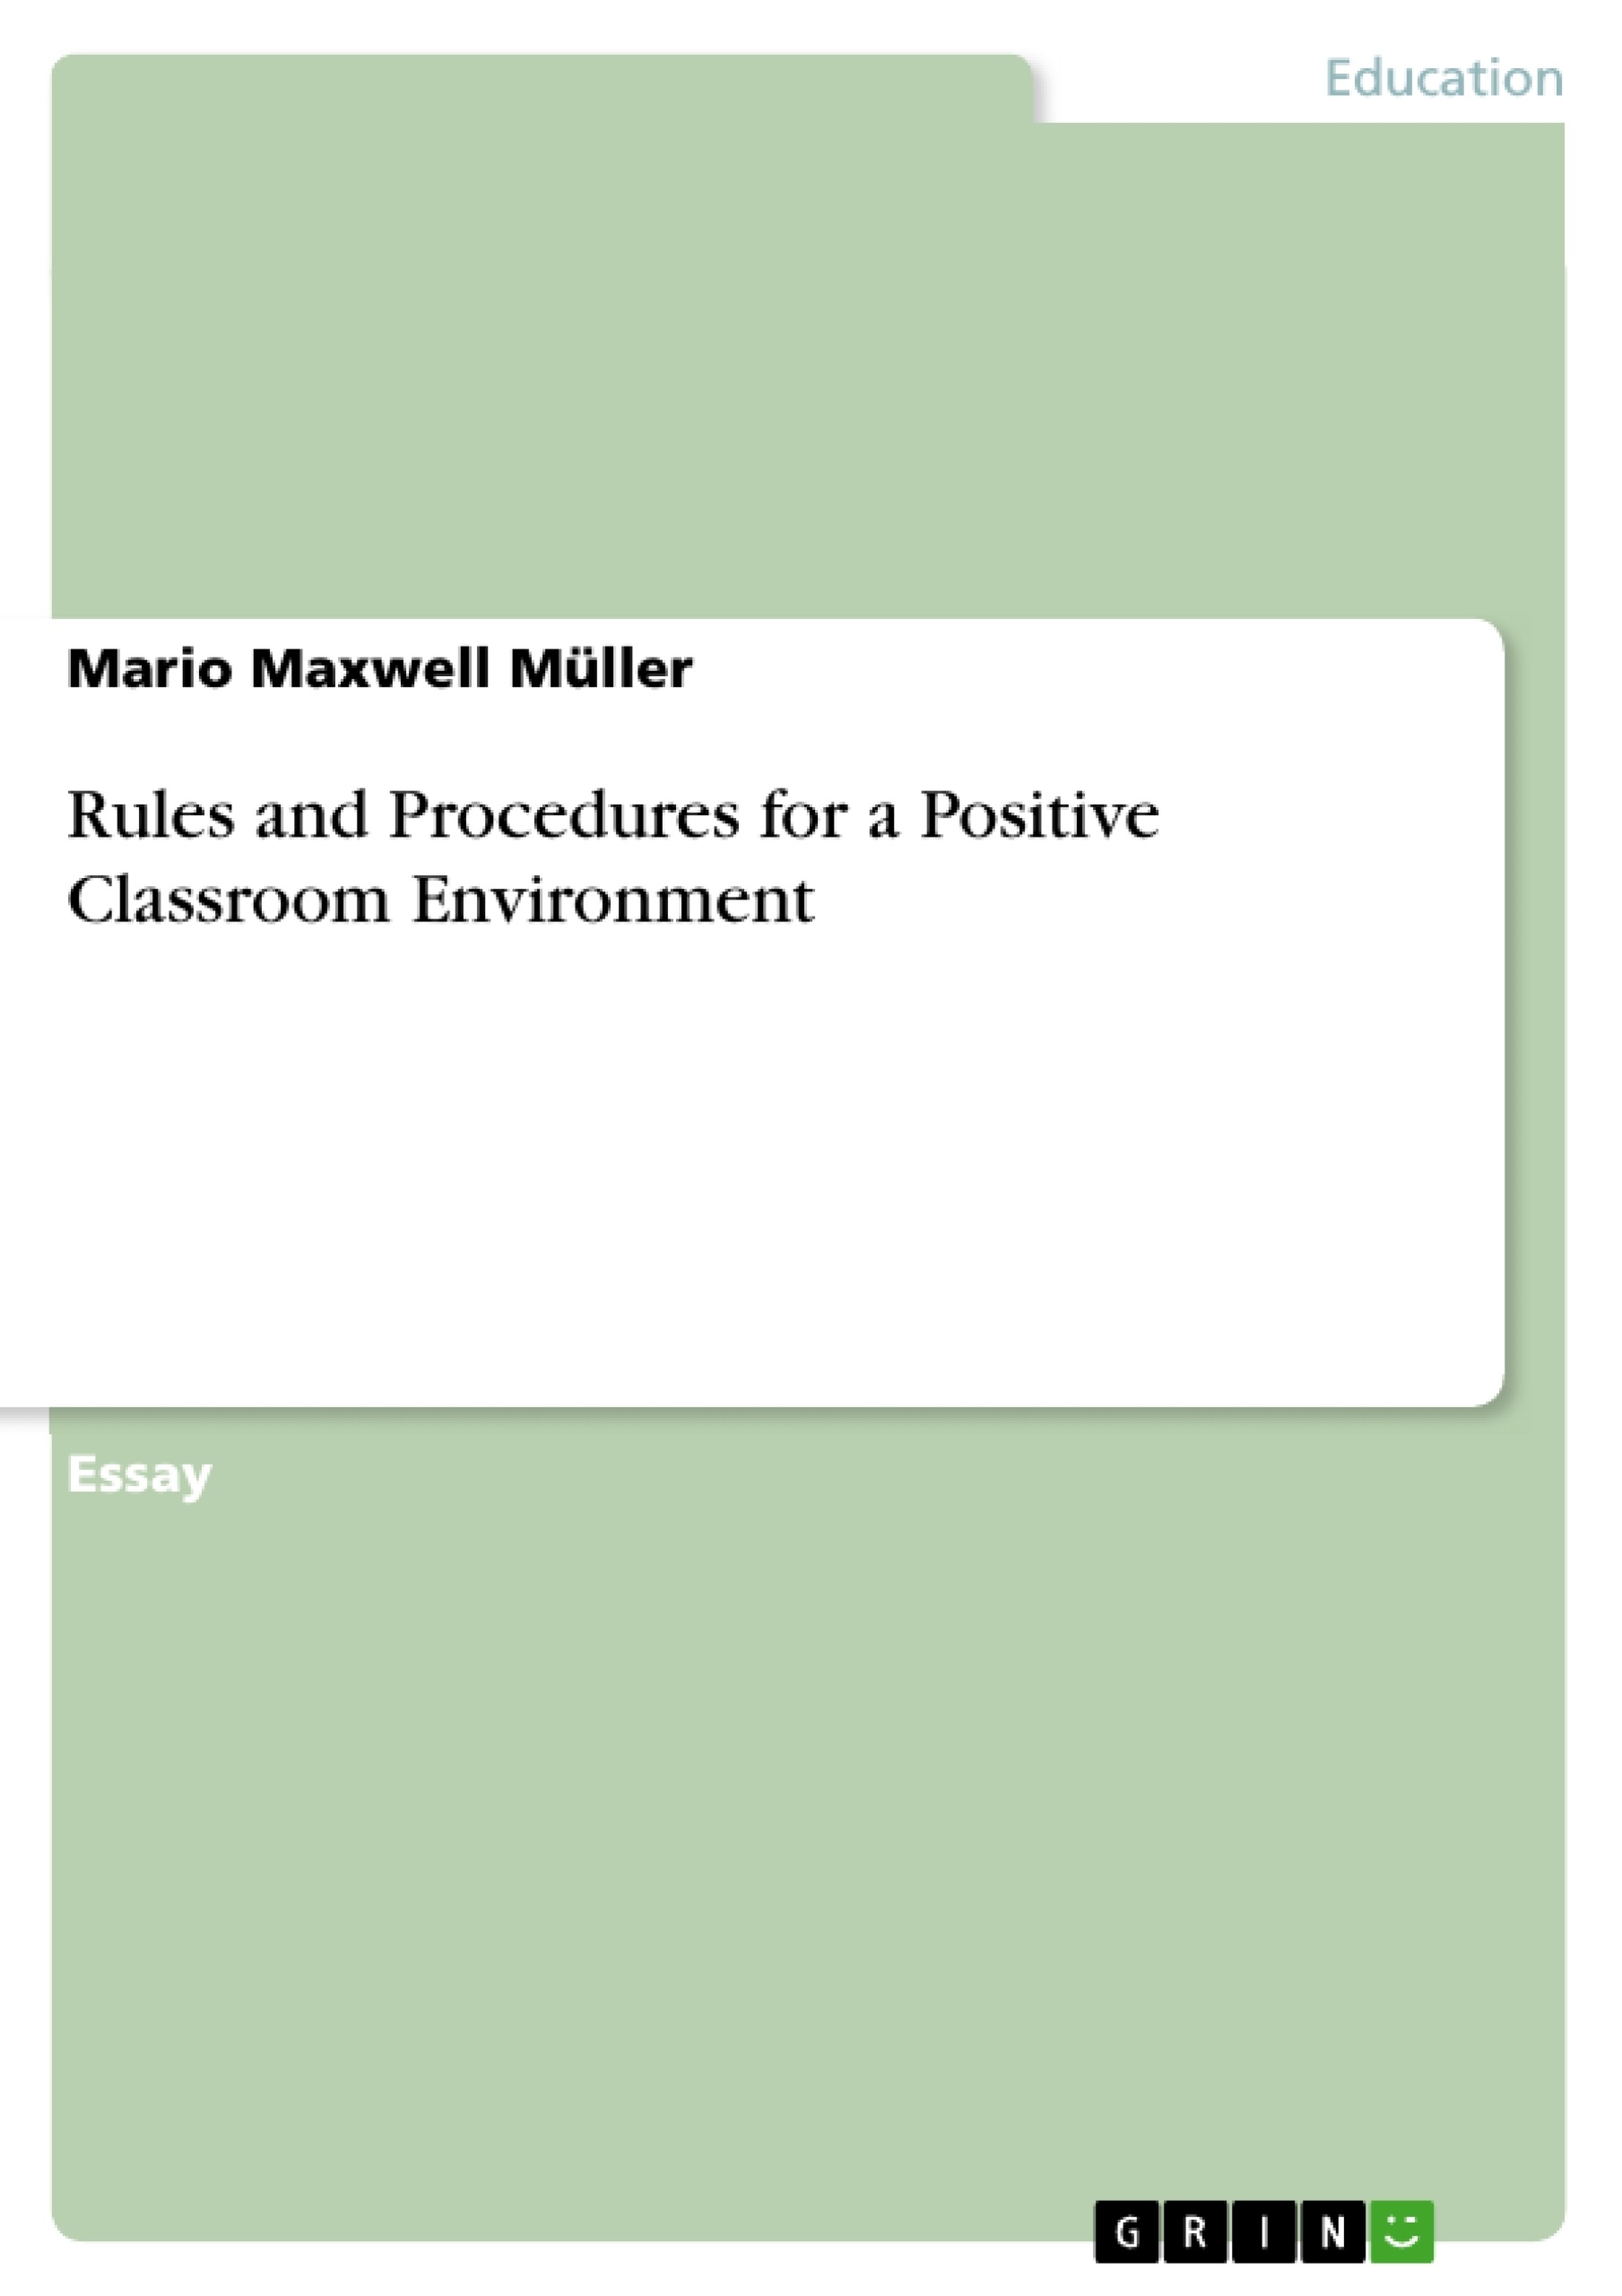 Title: Rules and Procedures for a Positive Classroom Environment